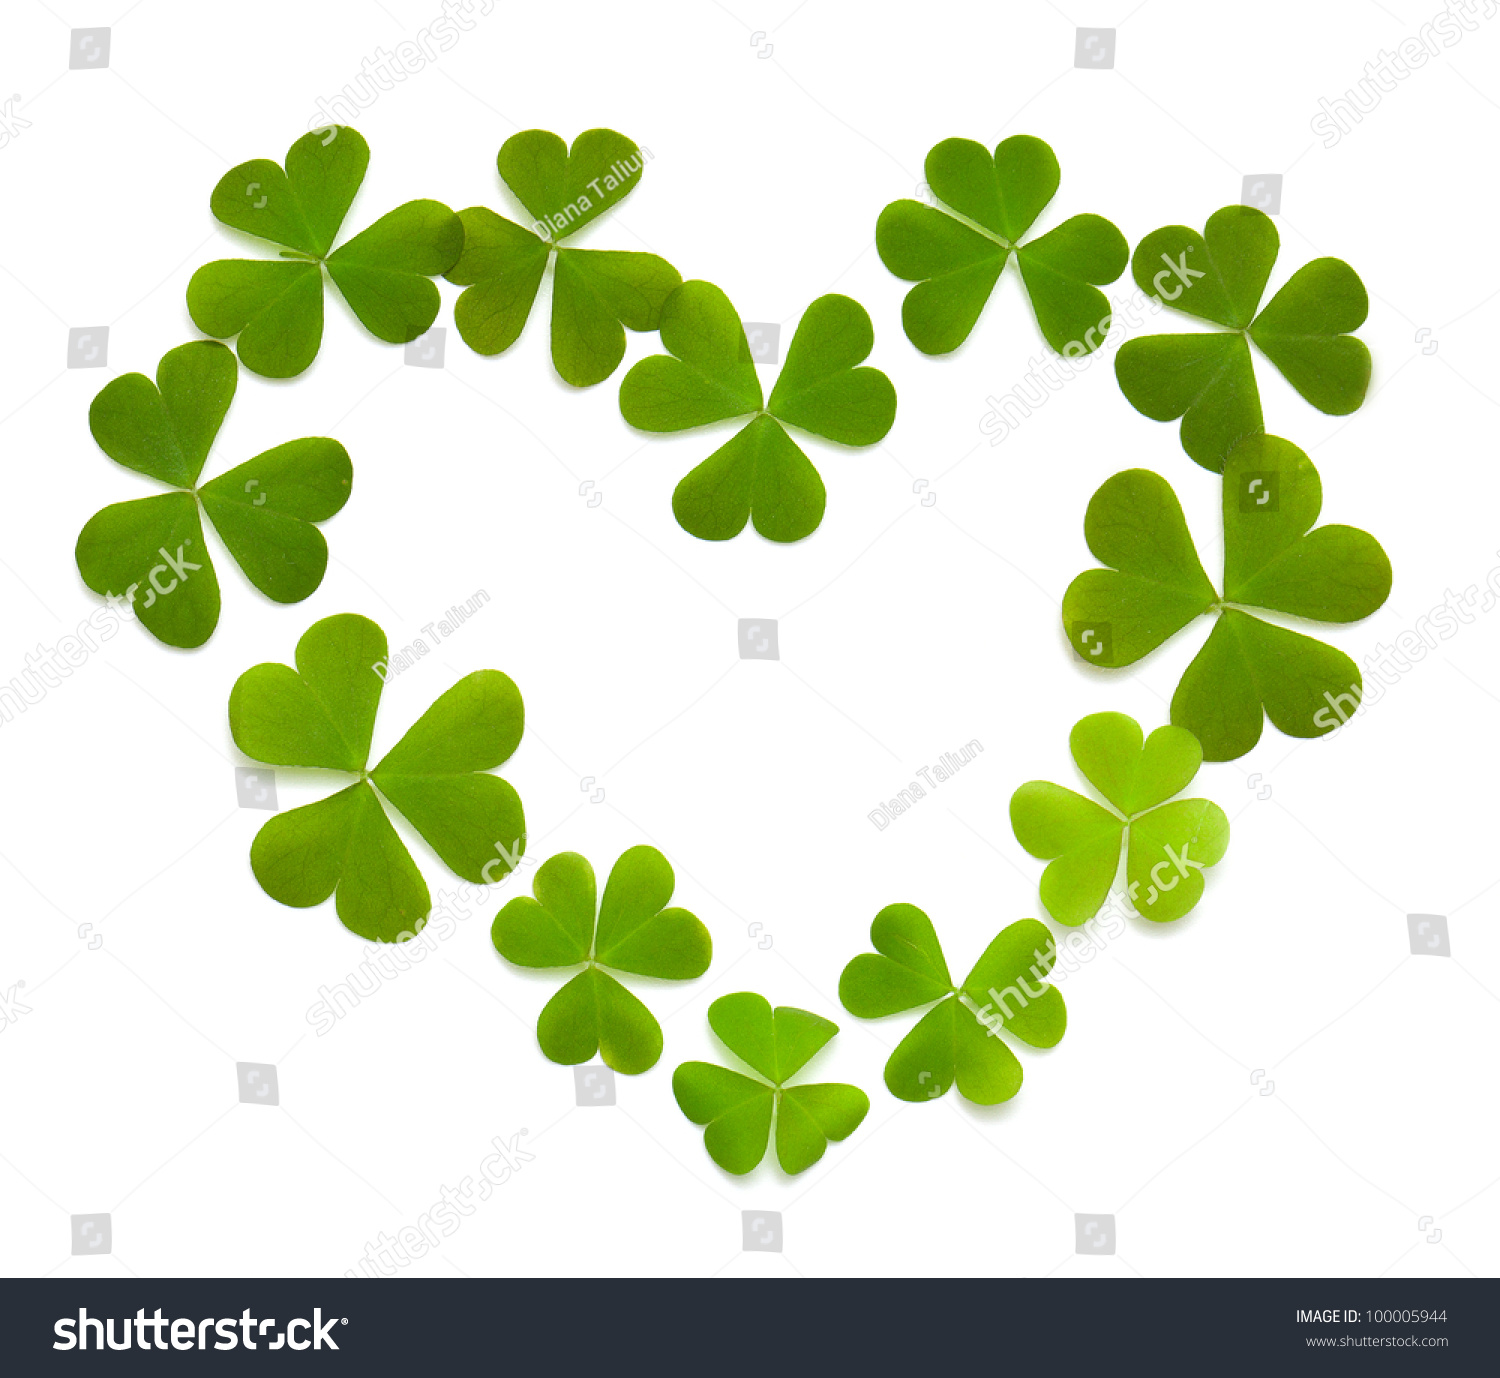 Heart Made Of Clover Isolated On White Stock Photo 100005944 : Shutterstock